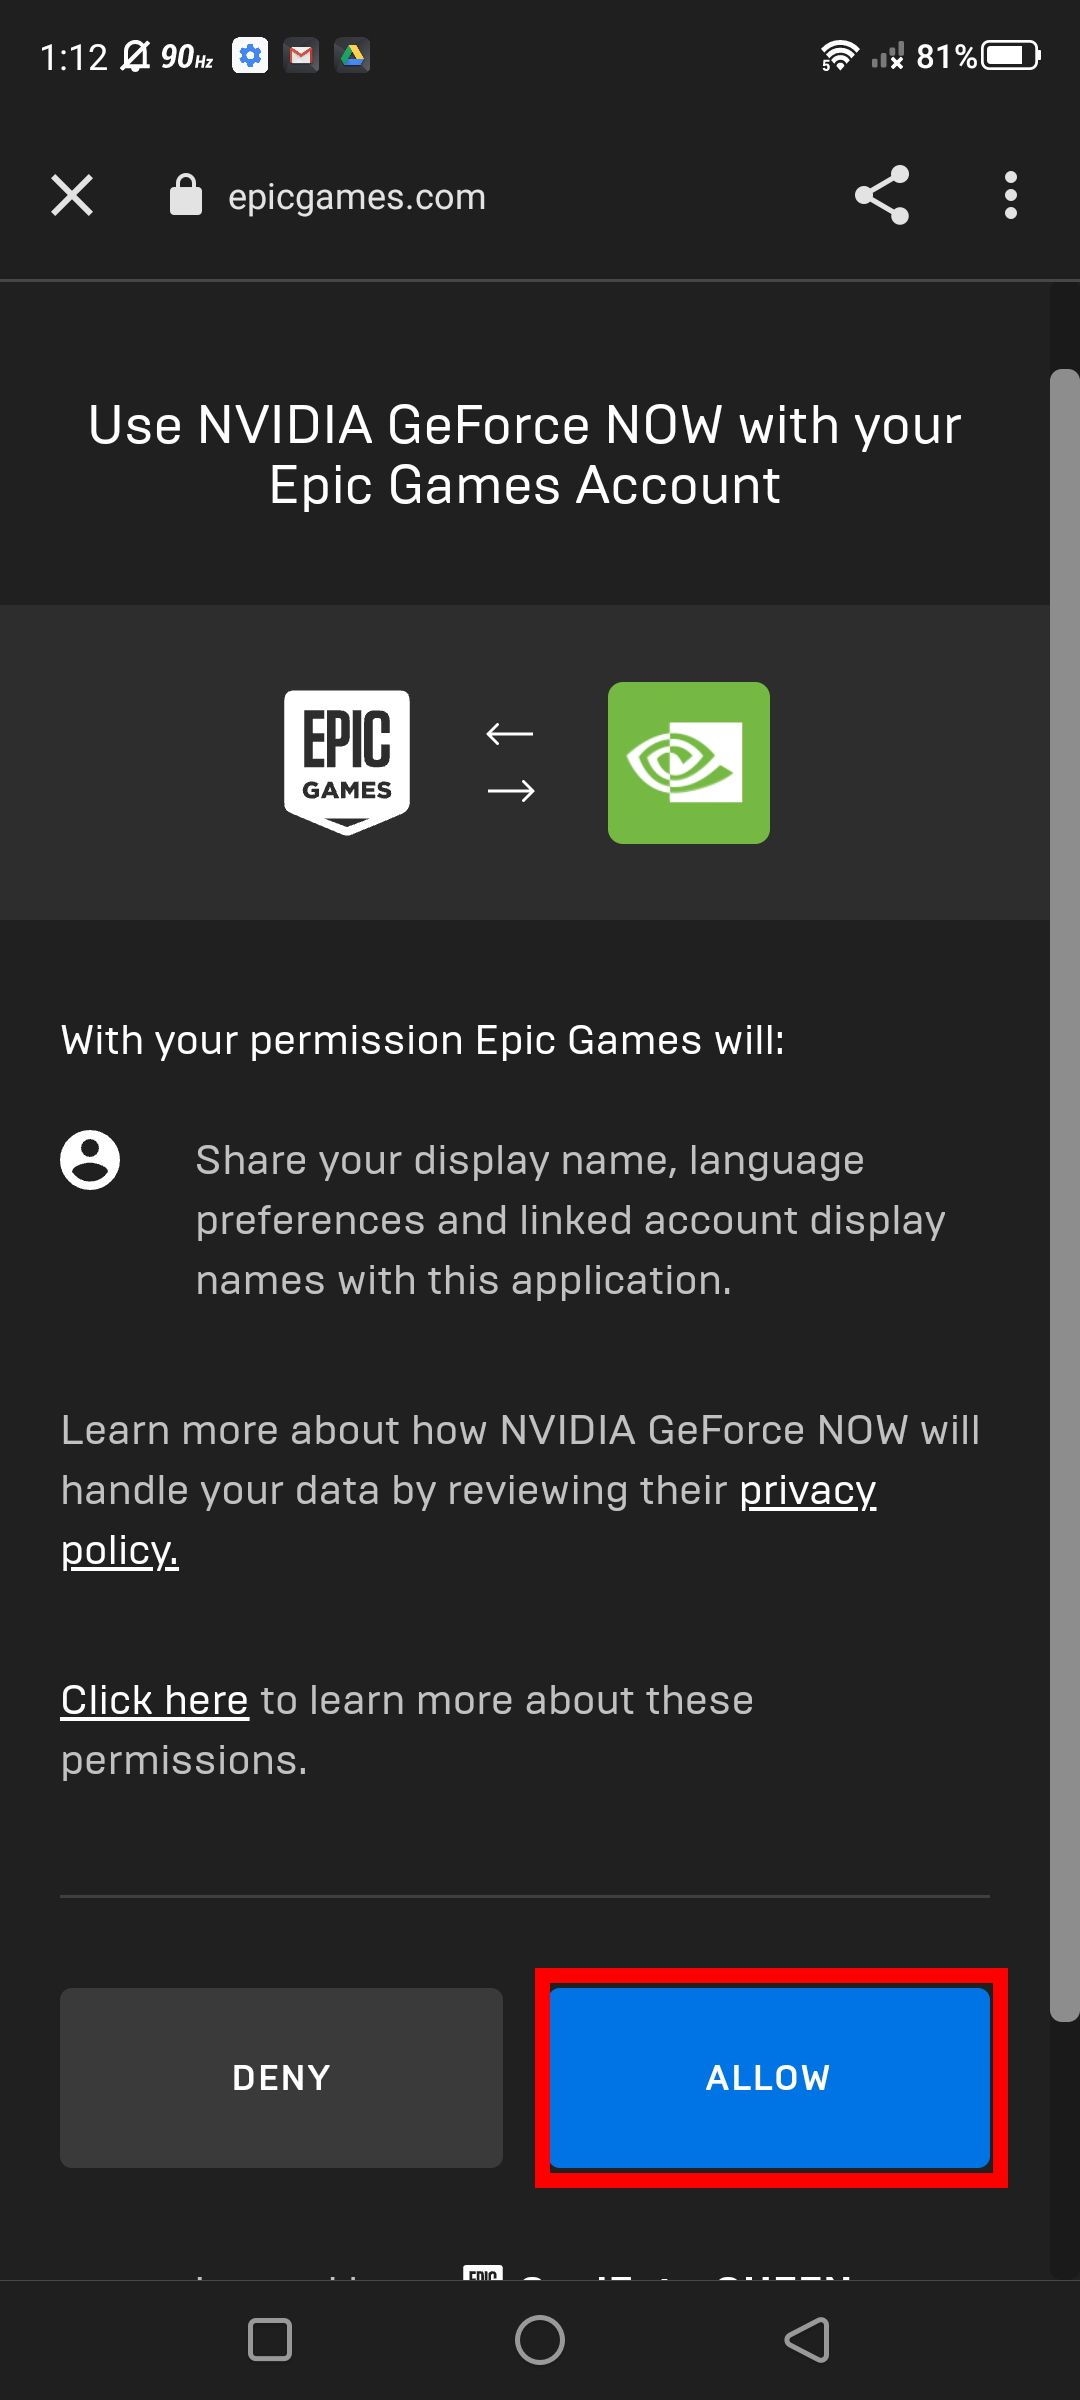 Adding connection permissions for GeForce Now and your Epic Games account